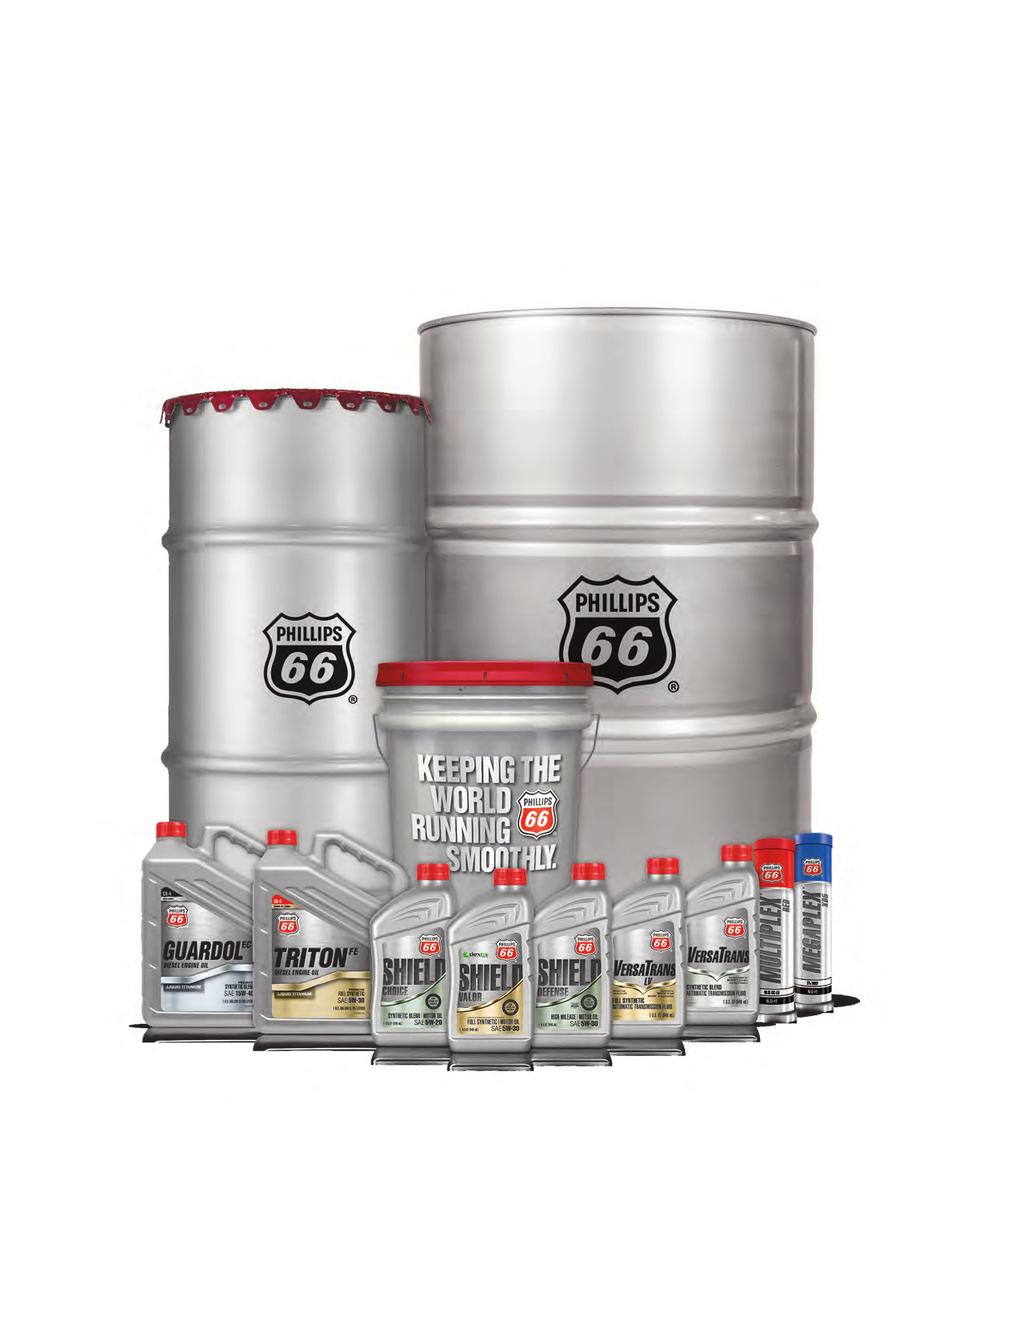 SOLUTIONS FOR THE DAILY GRIND. Phillips 66 Lubricants offers a complete line of products for a wide variety of industries. Check with your supplier today for more information and product availability.